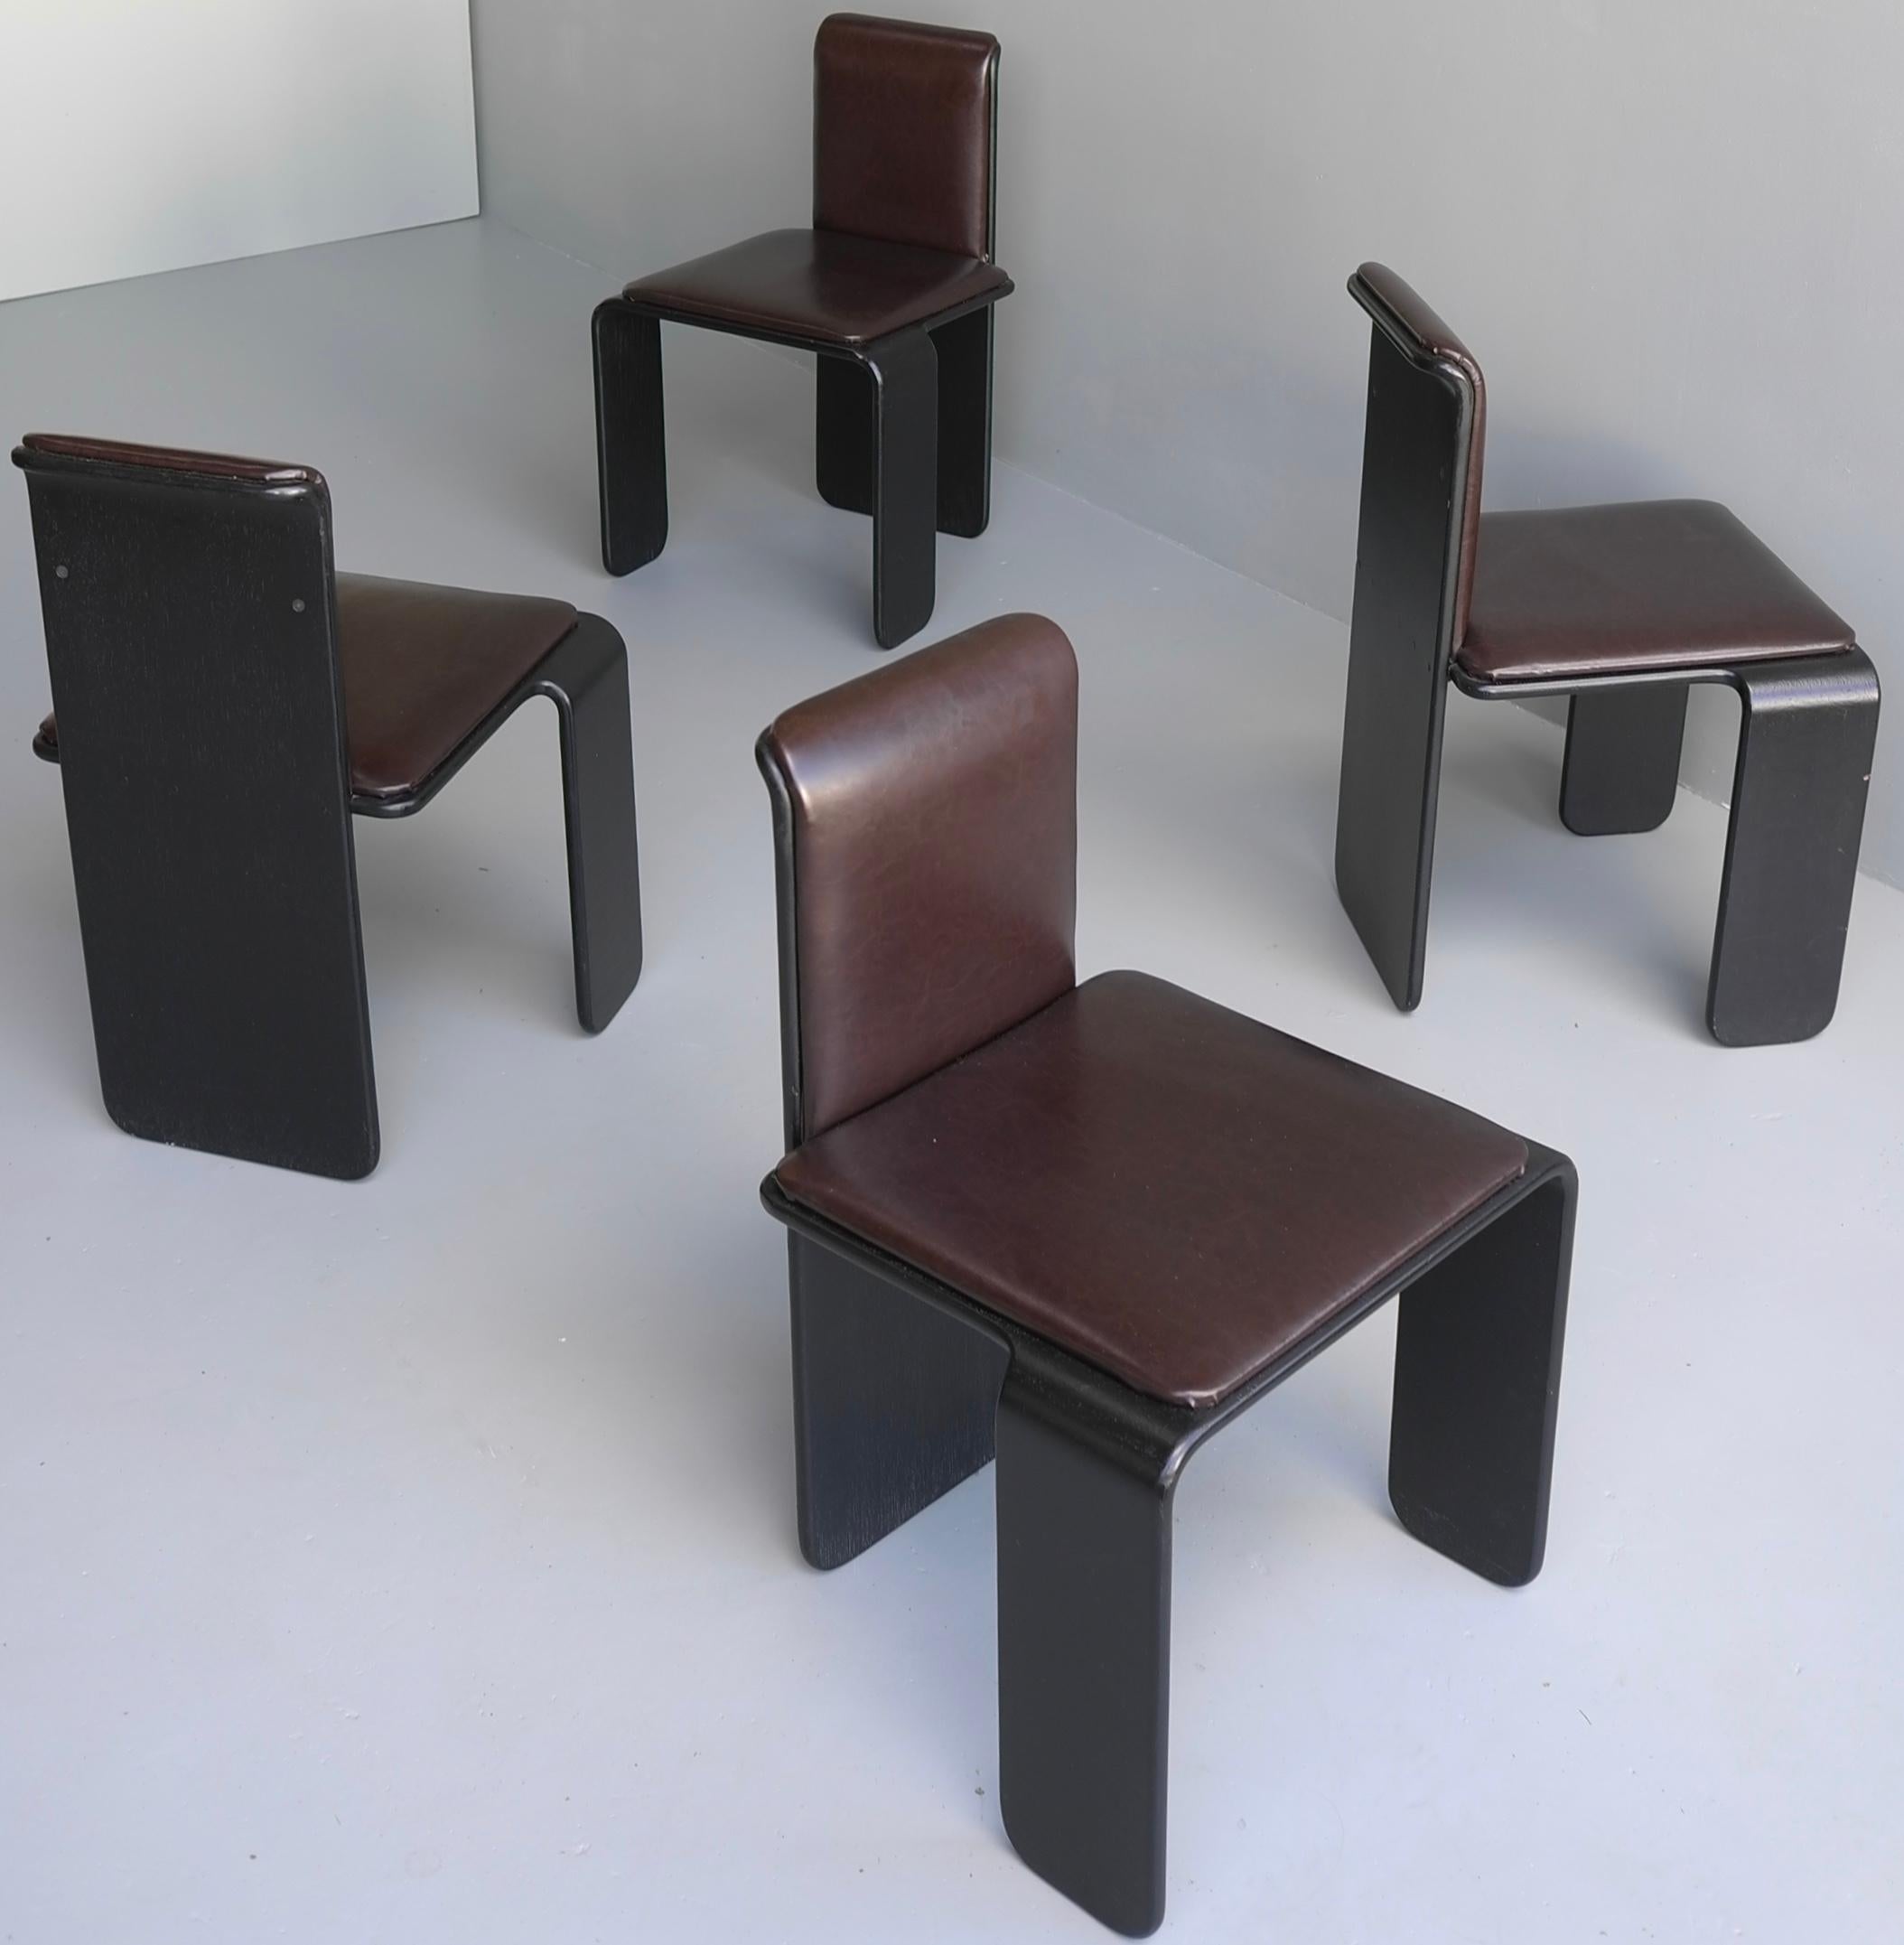 Set of four Italian wooden monk chairs in black and dark brown, 1970s.